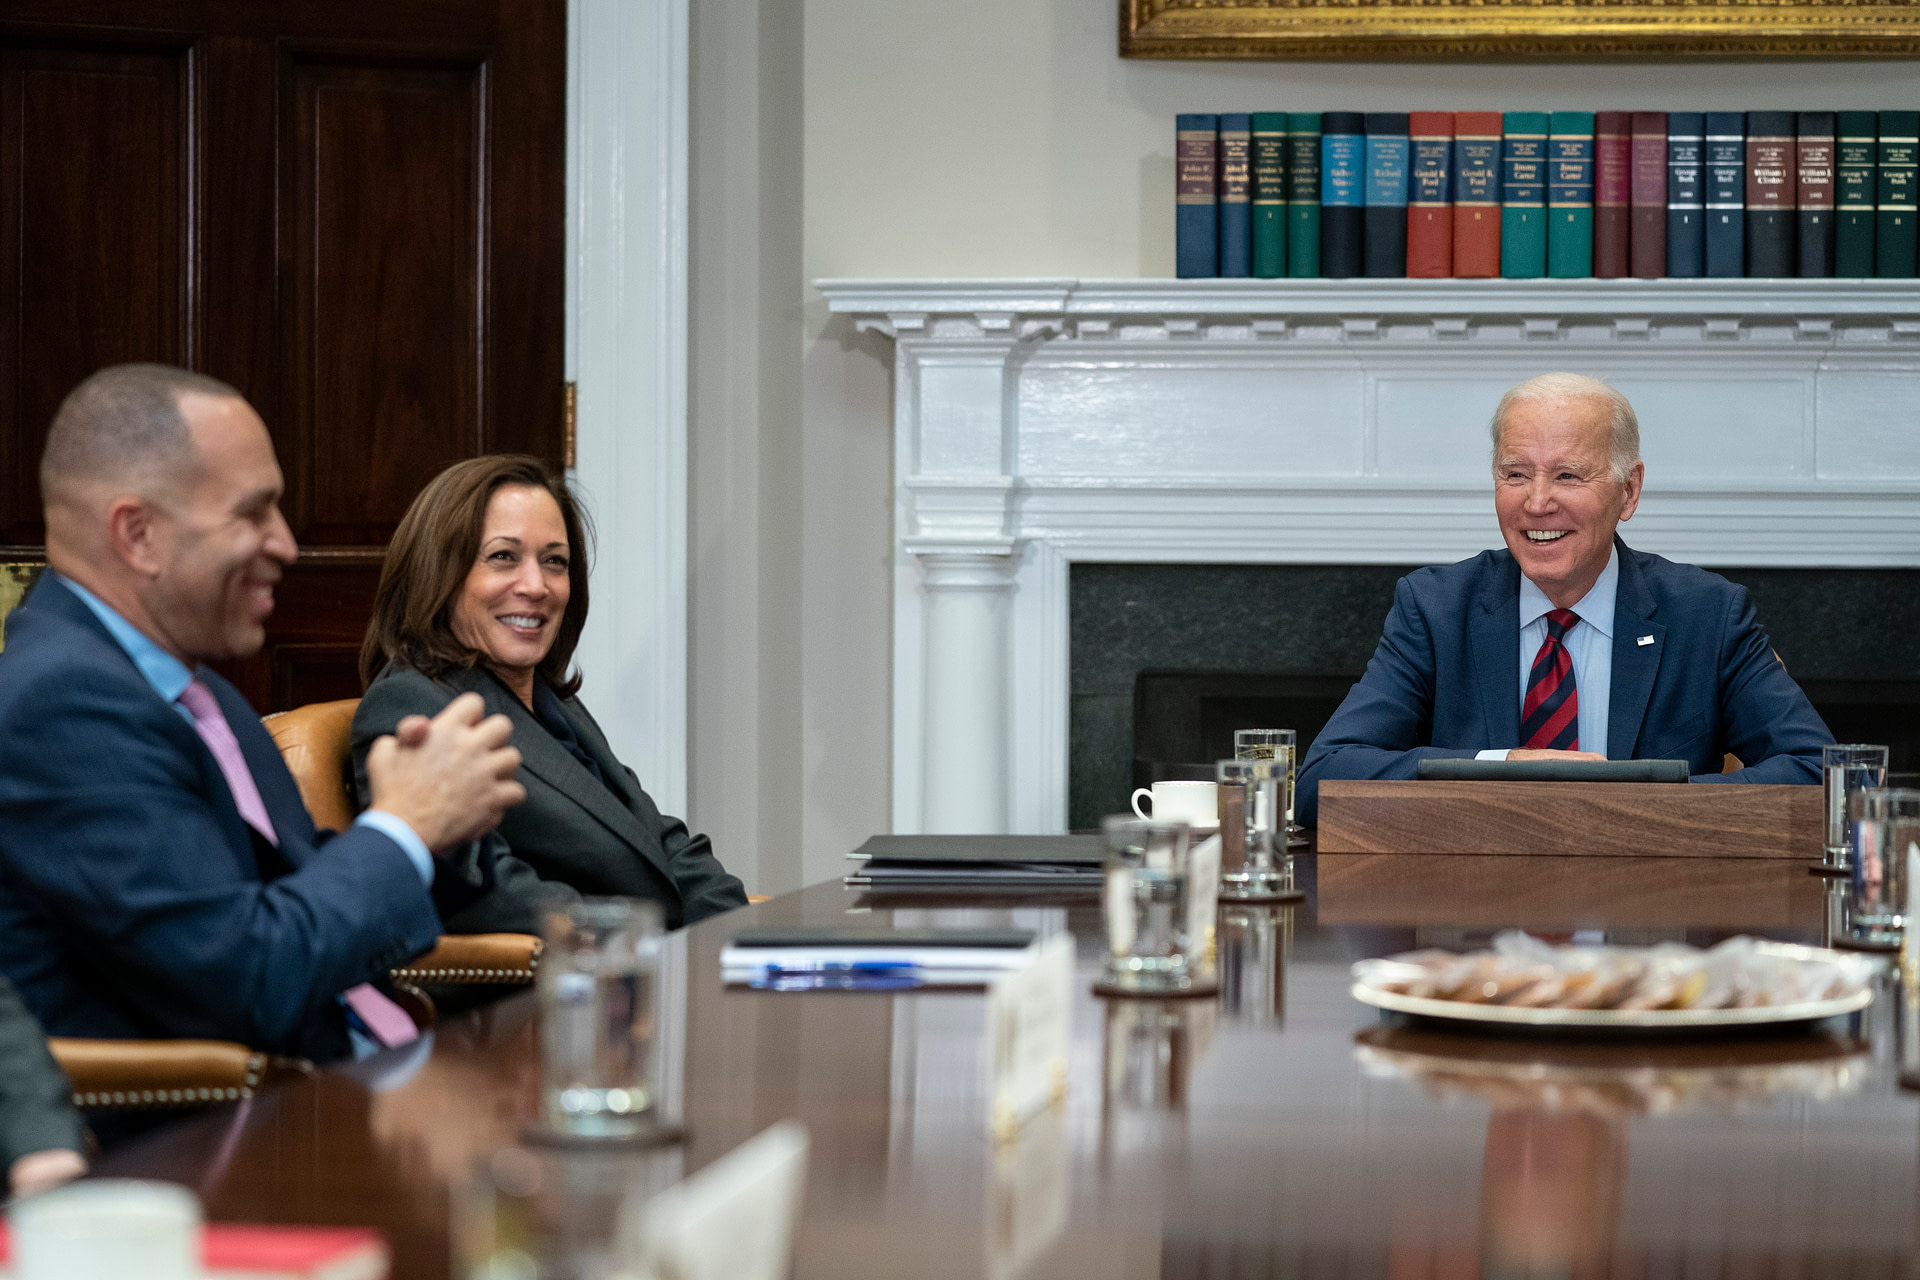 Biden hosts Democrats at White House as standoff over debt ceiling looms